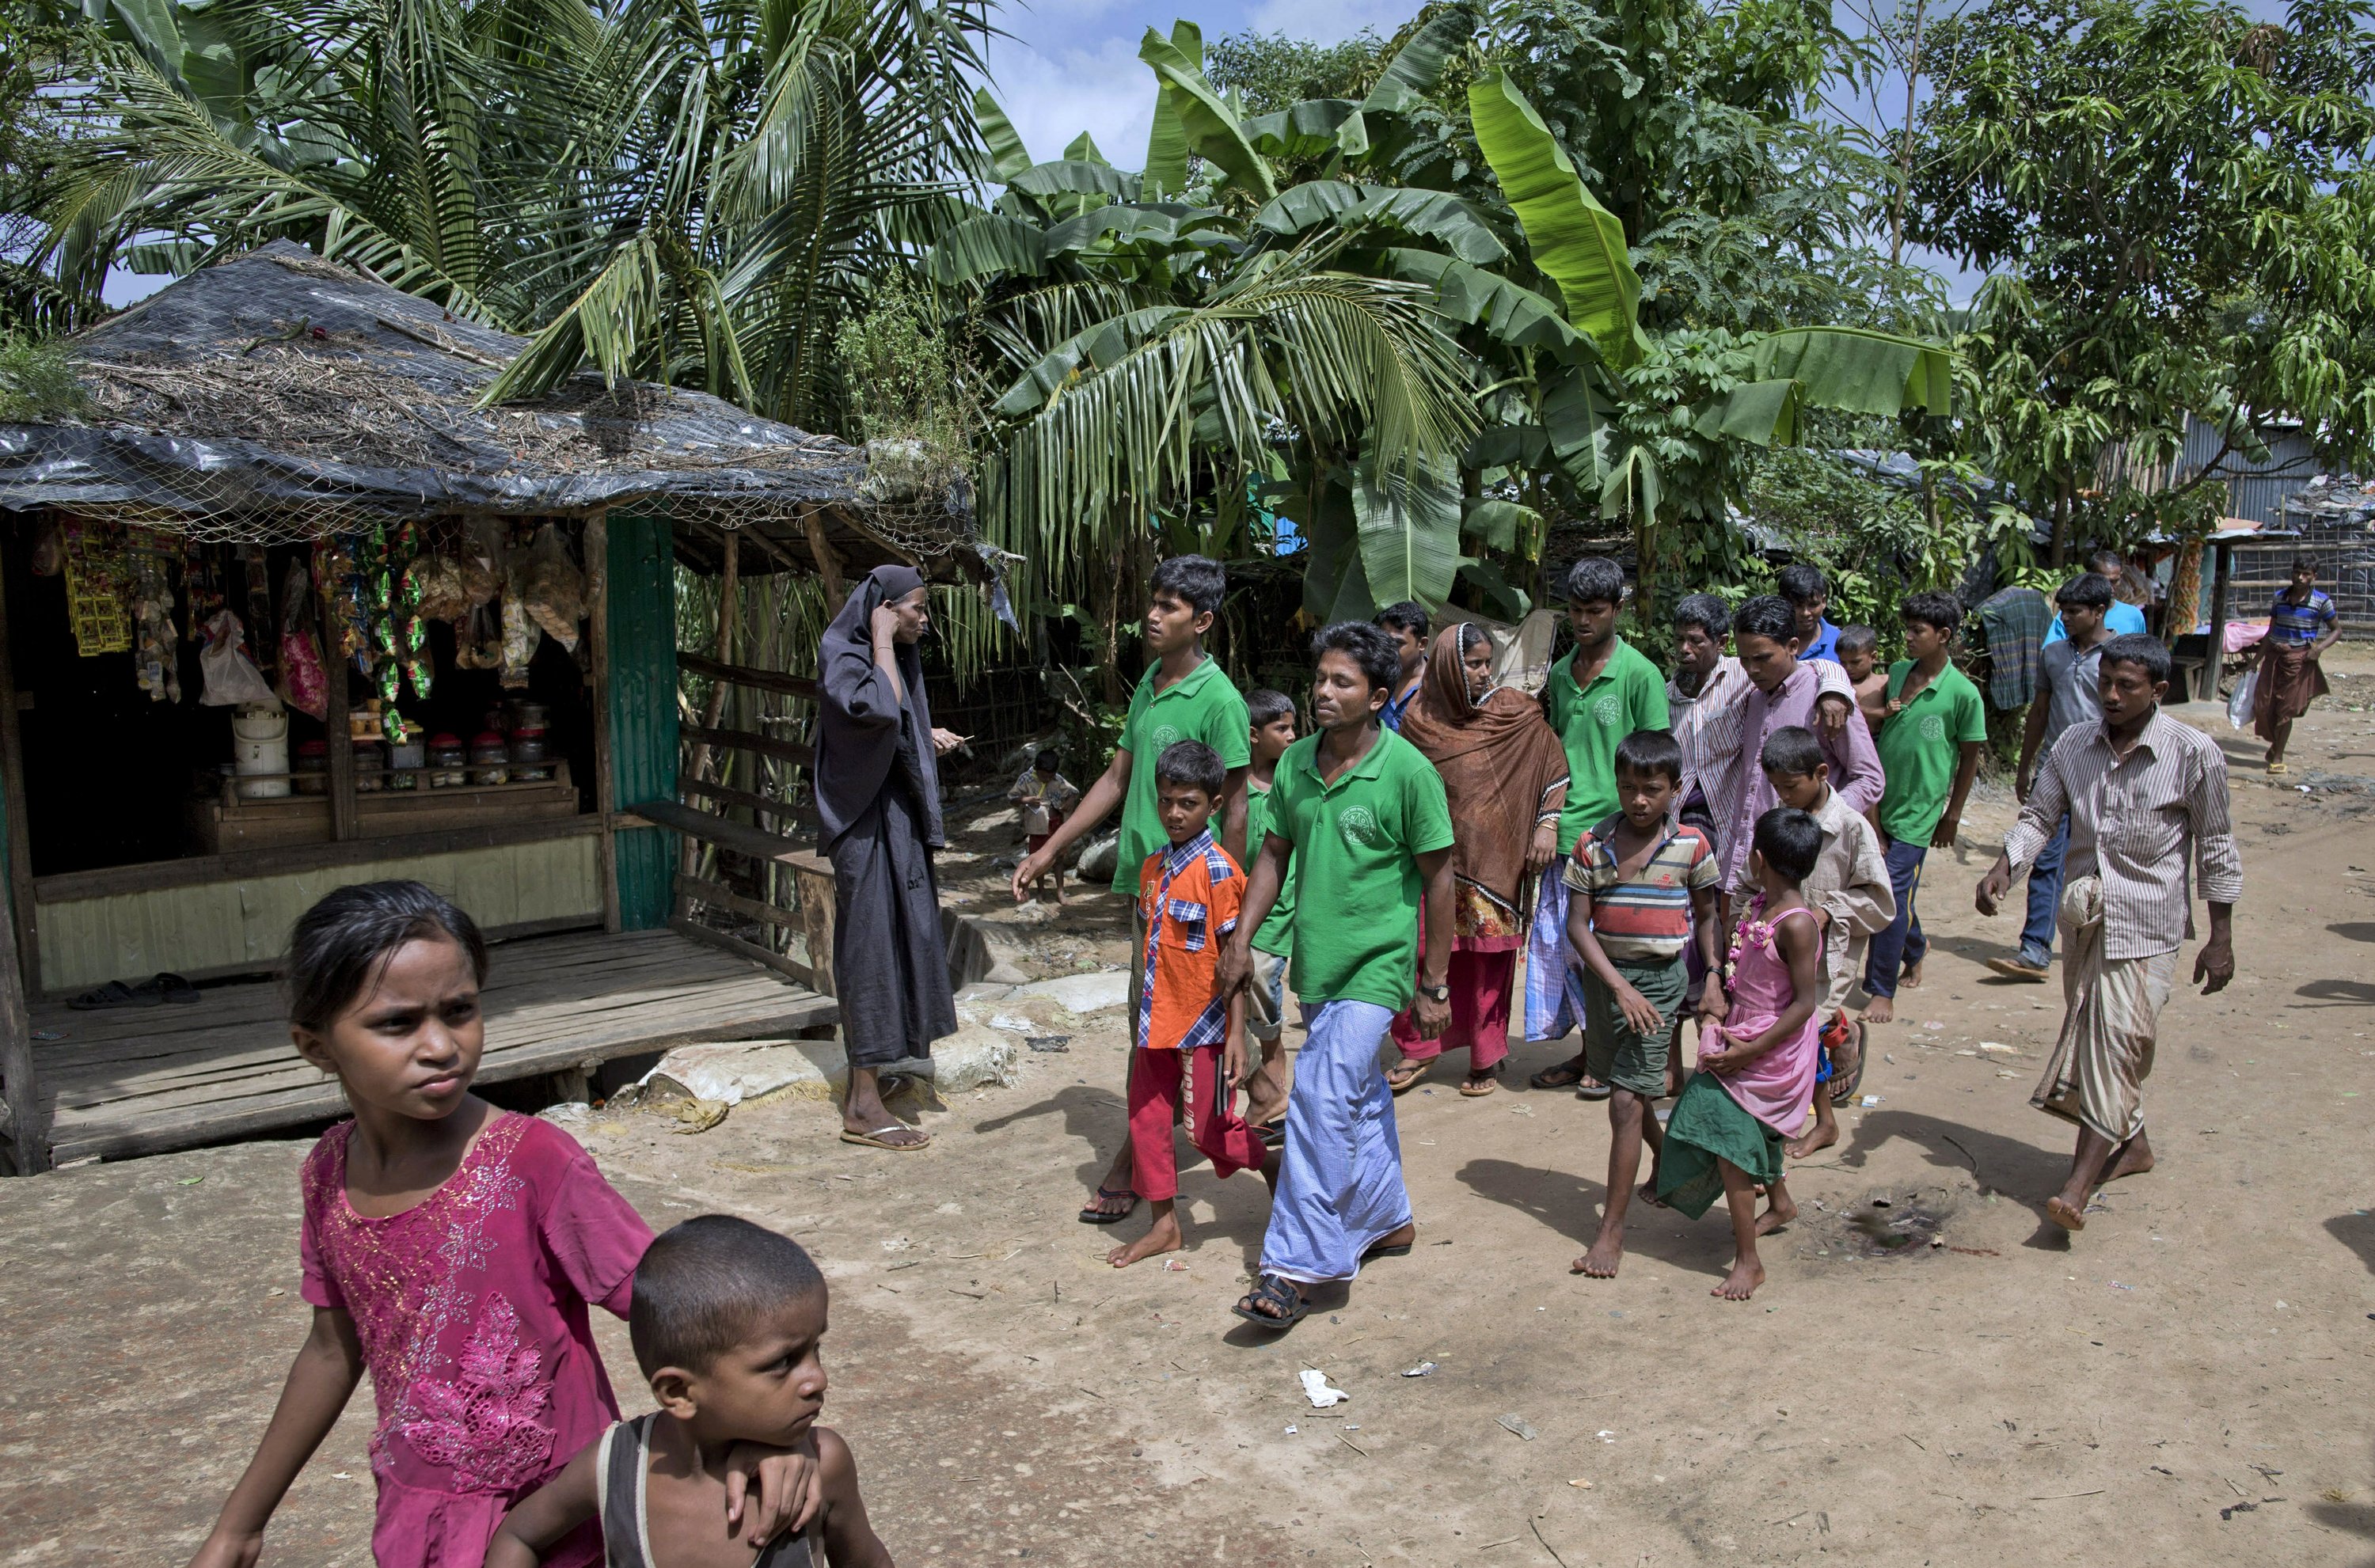 United Nations General Assembly states slam Myanmar government over Rohingya abuses. Image via AP.